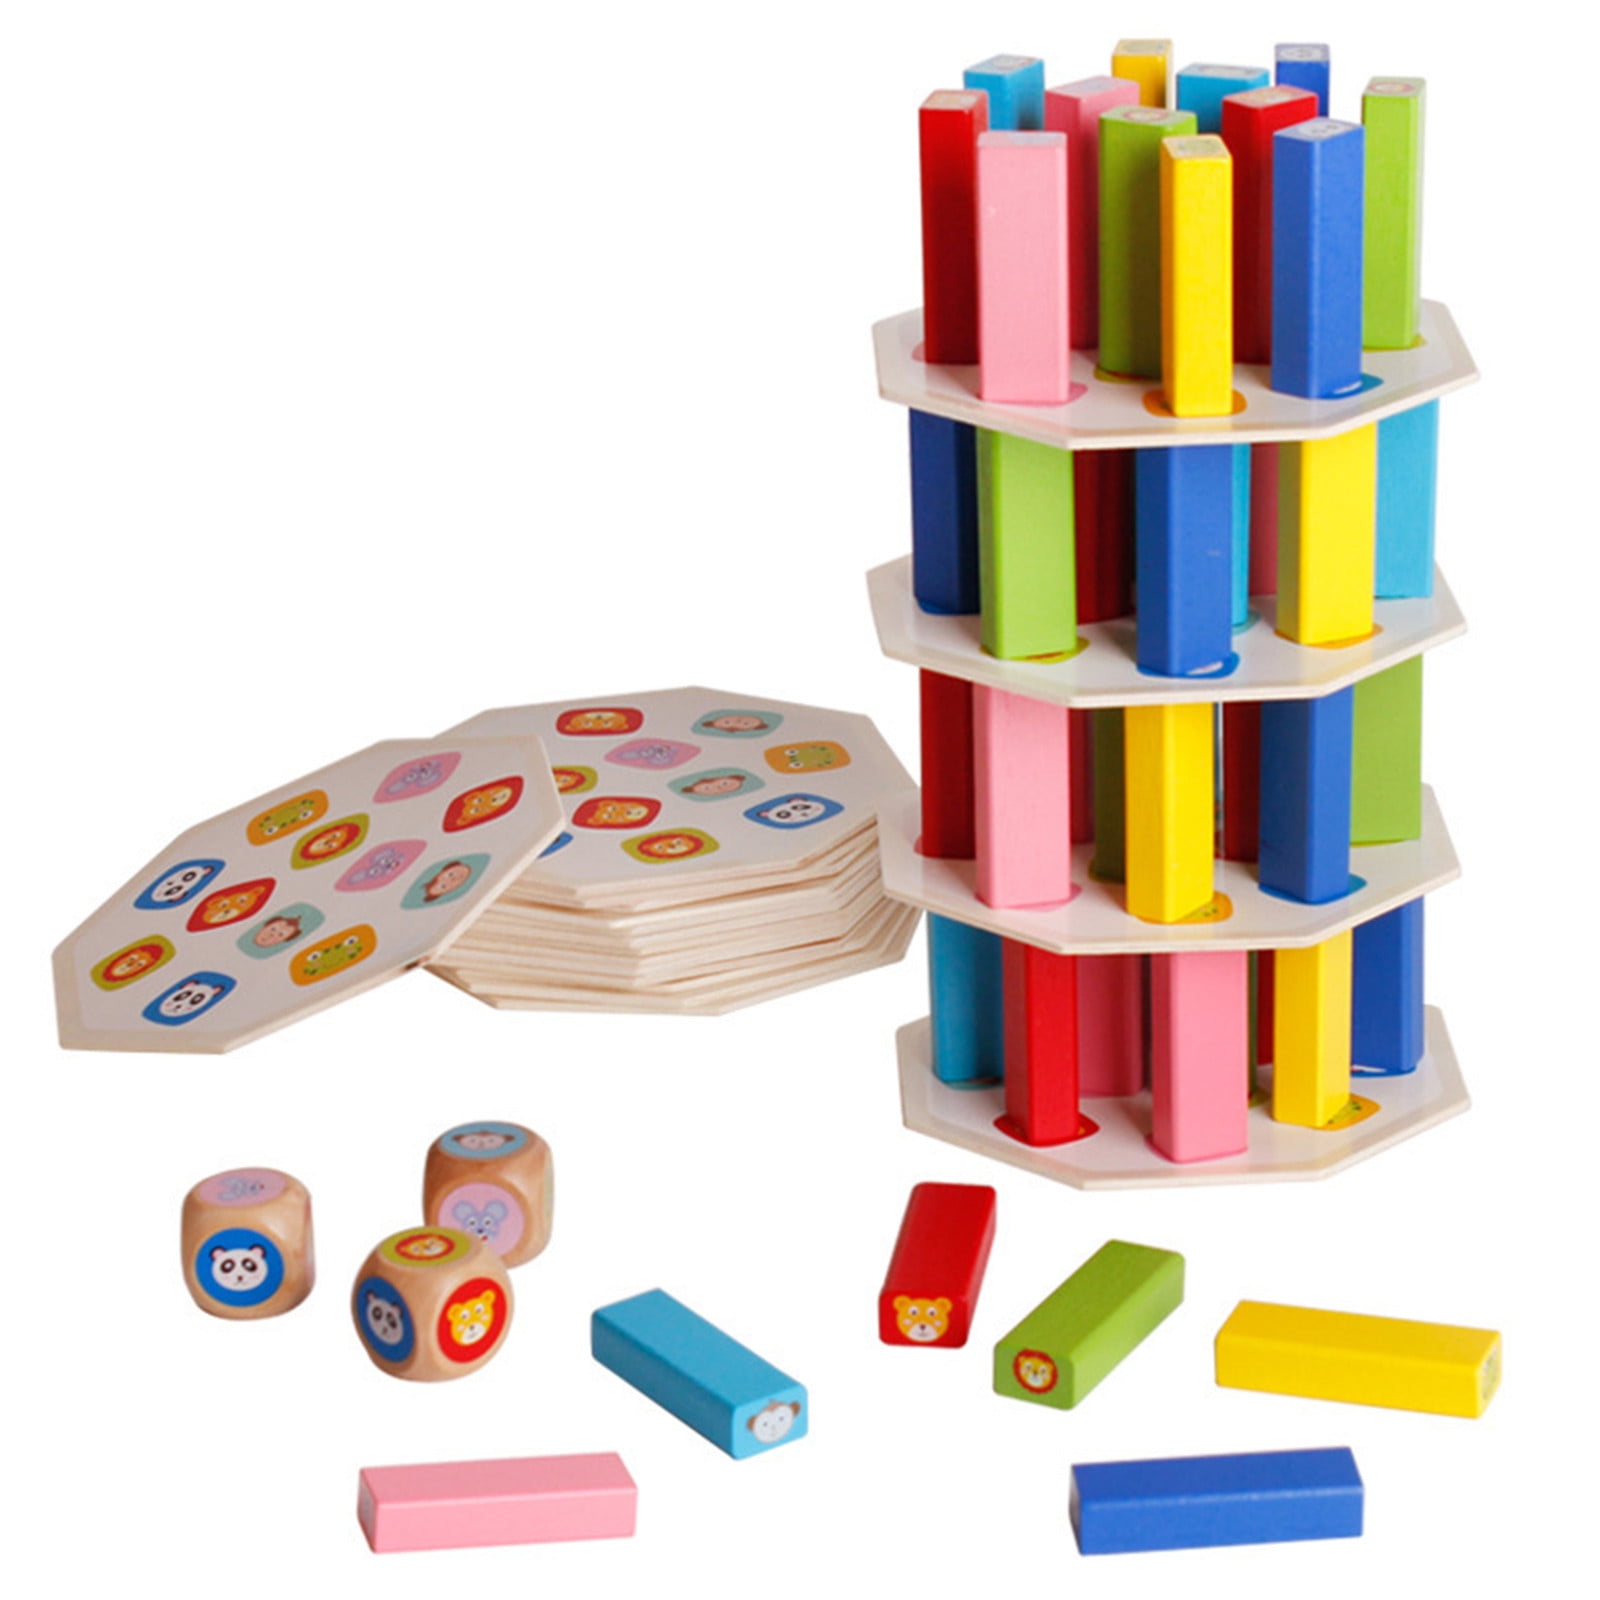 48 Pieces Premium Quality Set Tower and Dice Pidoko Kids Wooden Board Games Stacking and Tumbling Colored Blocks 